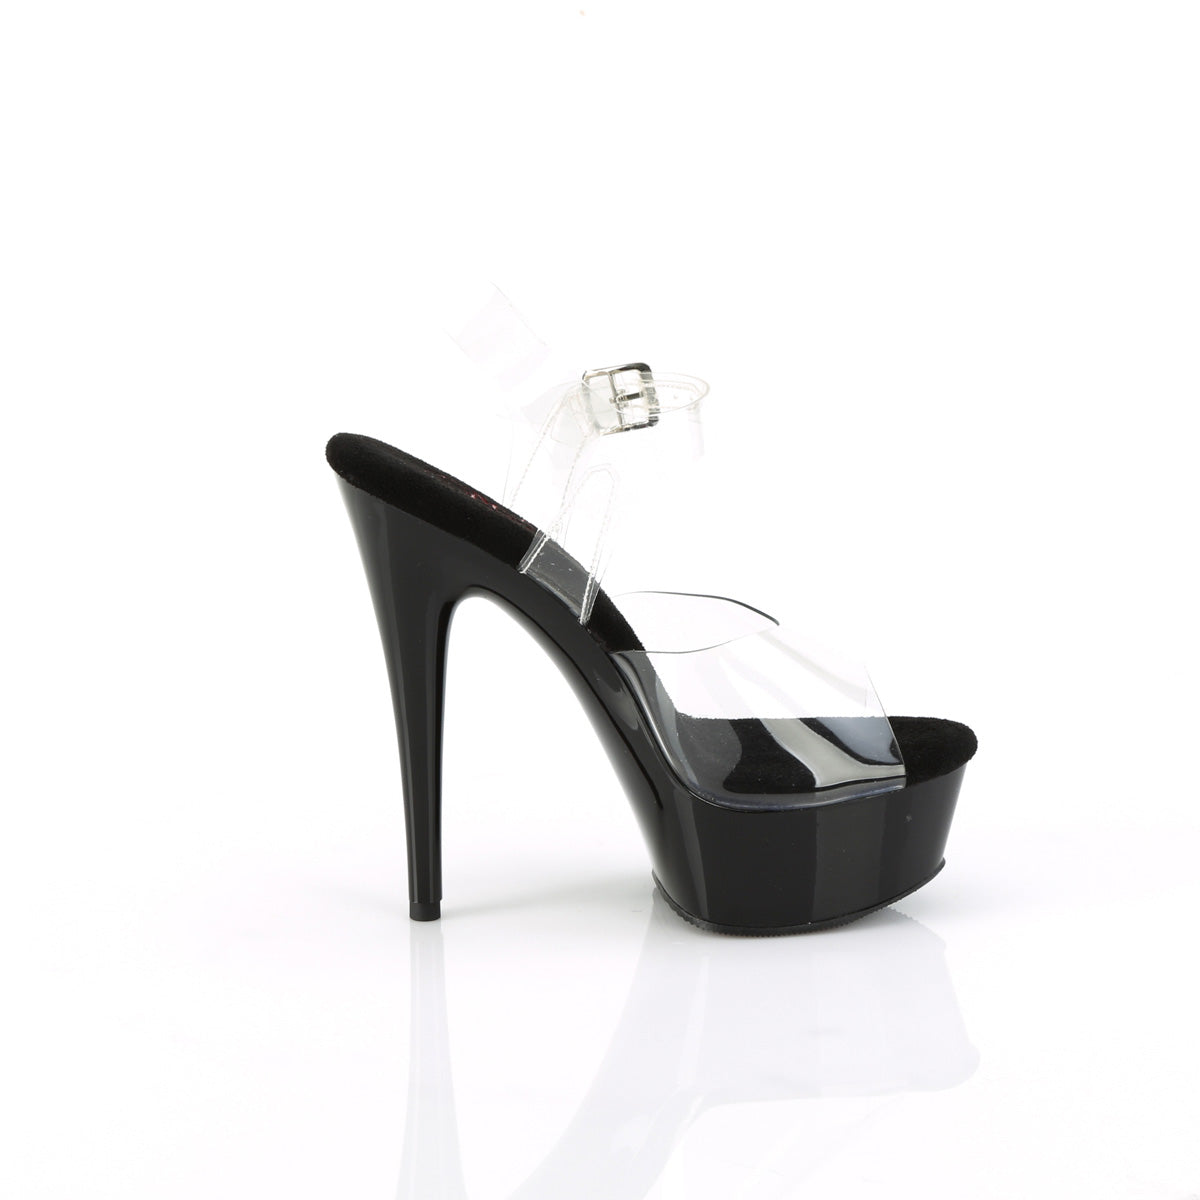 6 Inch Heel EXCITE-608 Clear Black